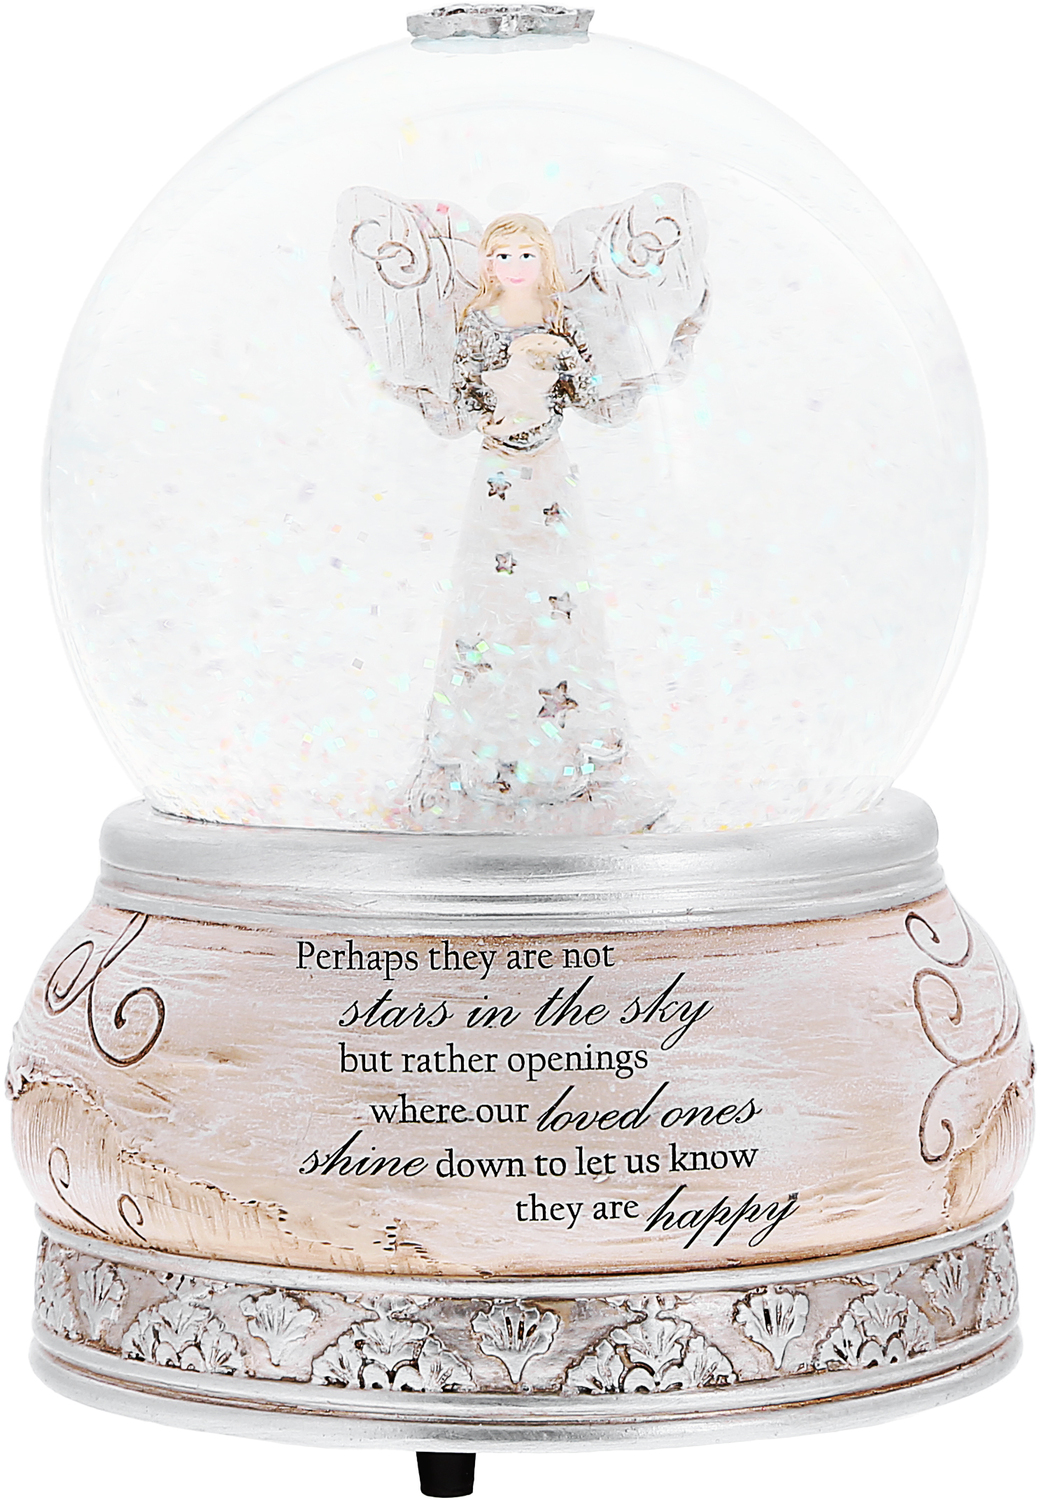 Stars in the Sky by Elements - Stars in the Sky - LED Lit, 100mm Musical Water Globe